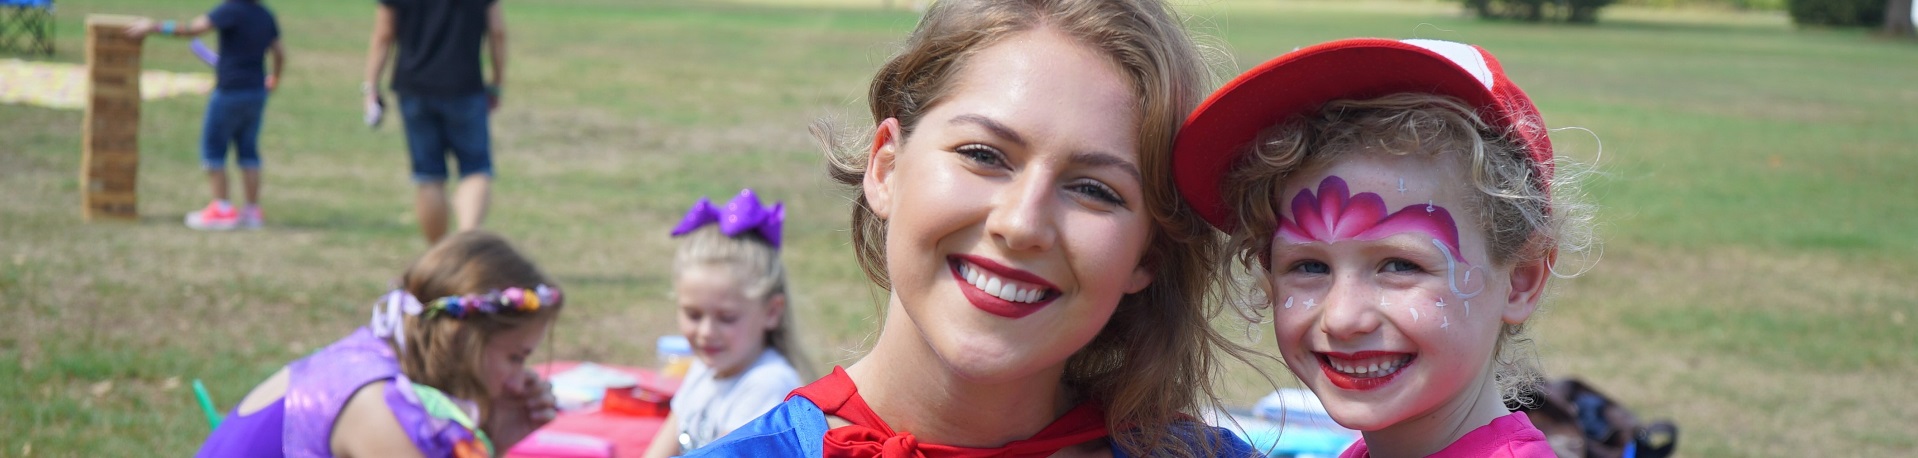 image of Supergirl as kids party entertainer for corporate events with Superheroes Inc